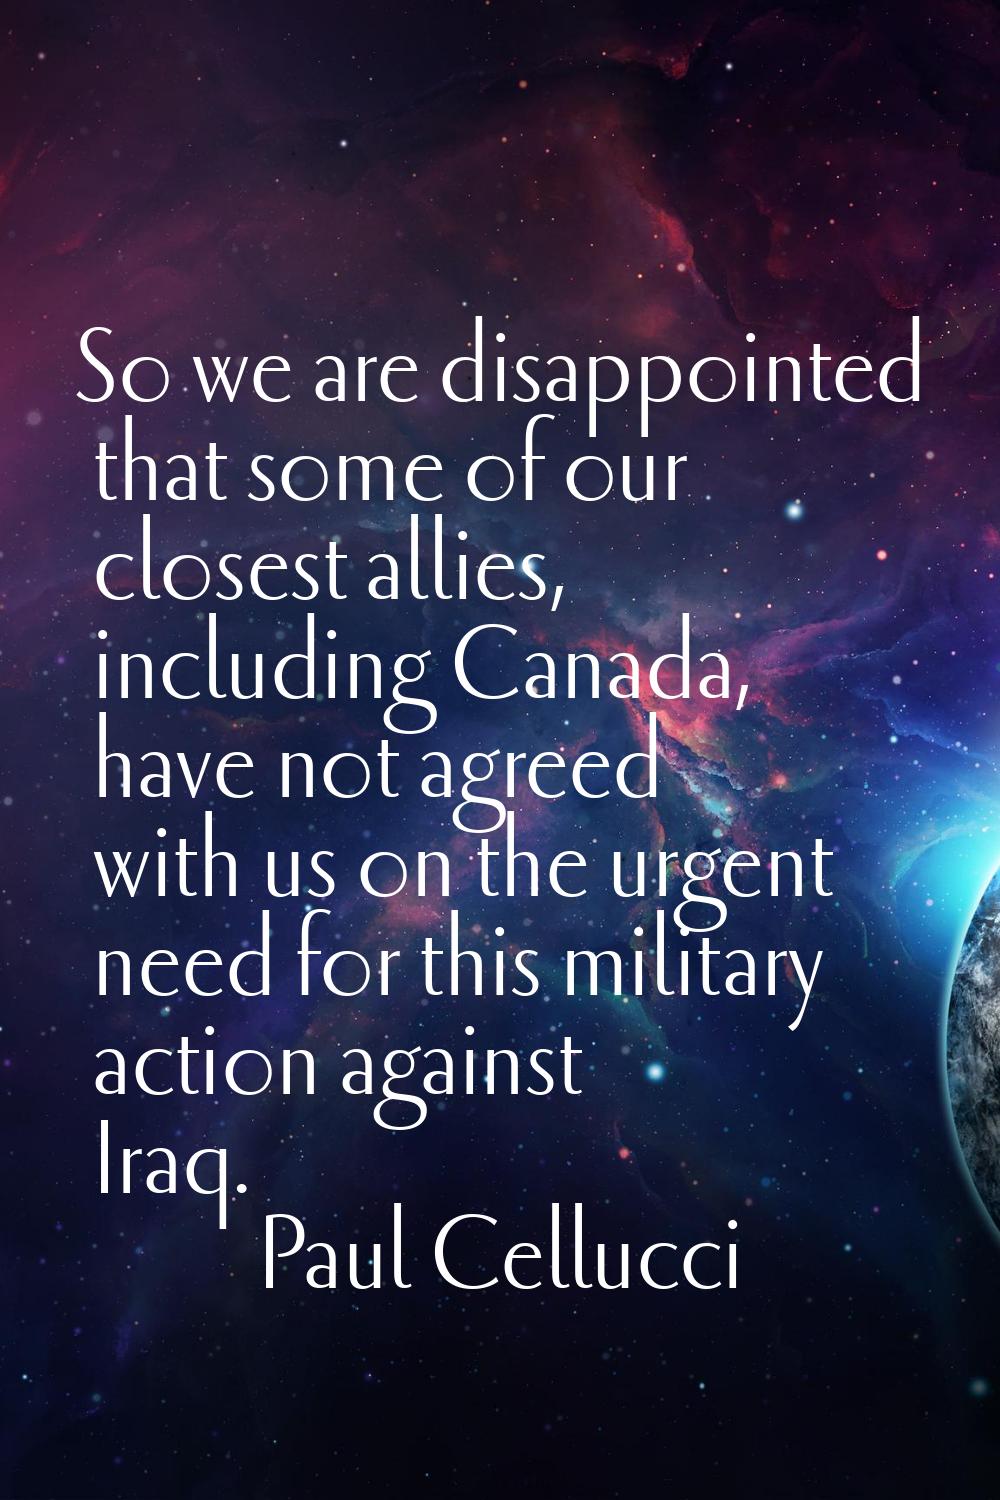 So we are disappointed that some of our closest allies, including Canada, have not agreed with us o